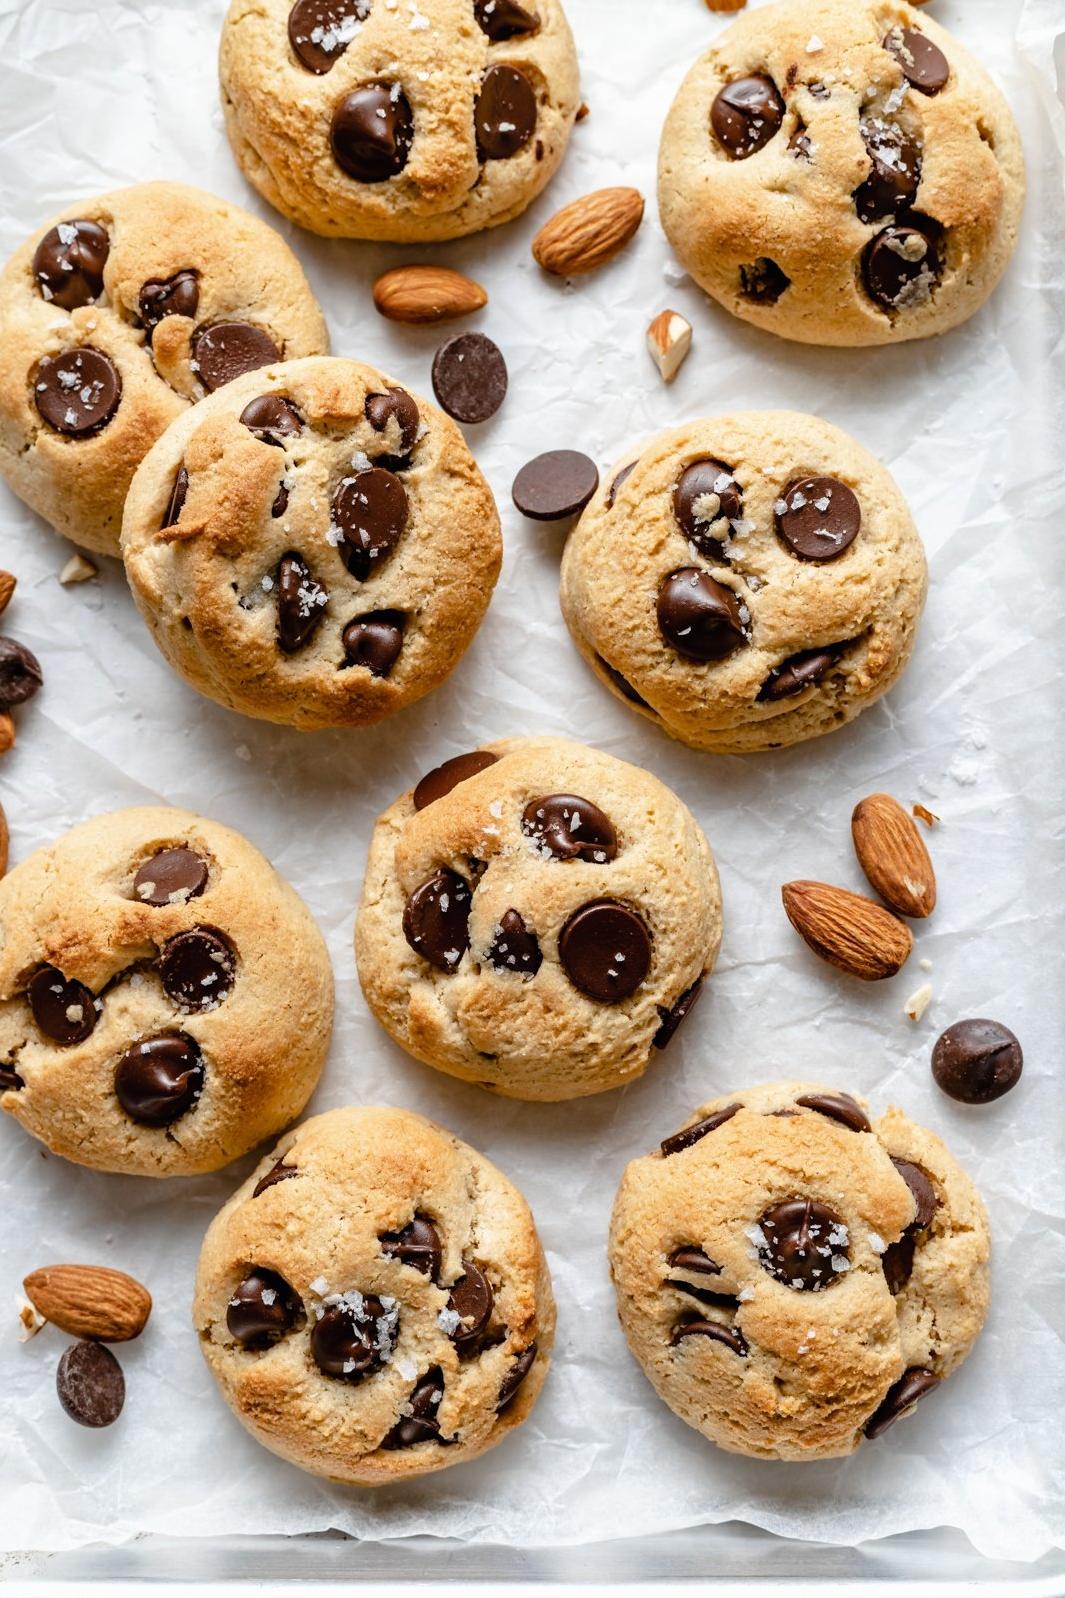  A healthier twist on a classic cookie recipe